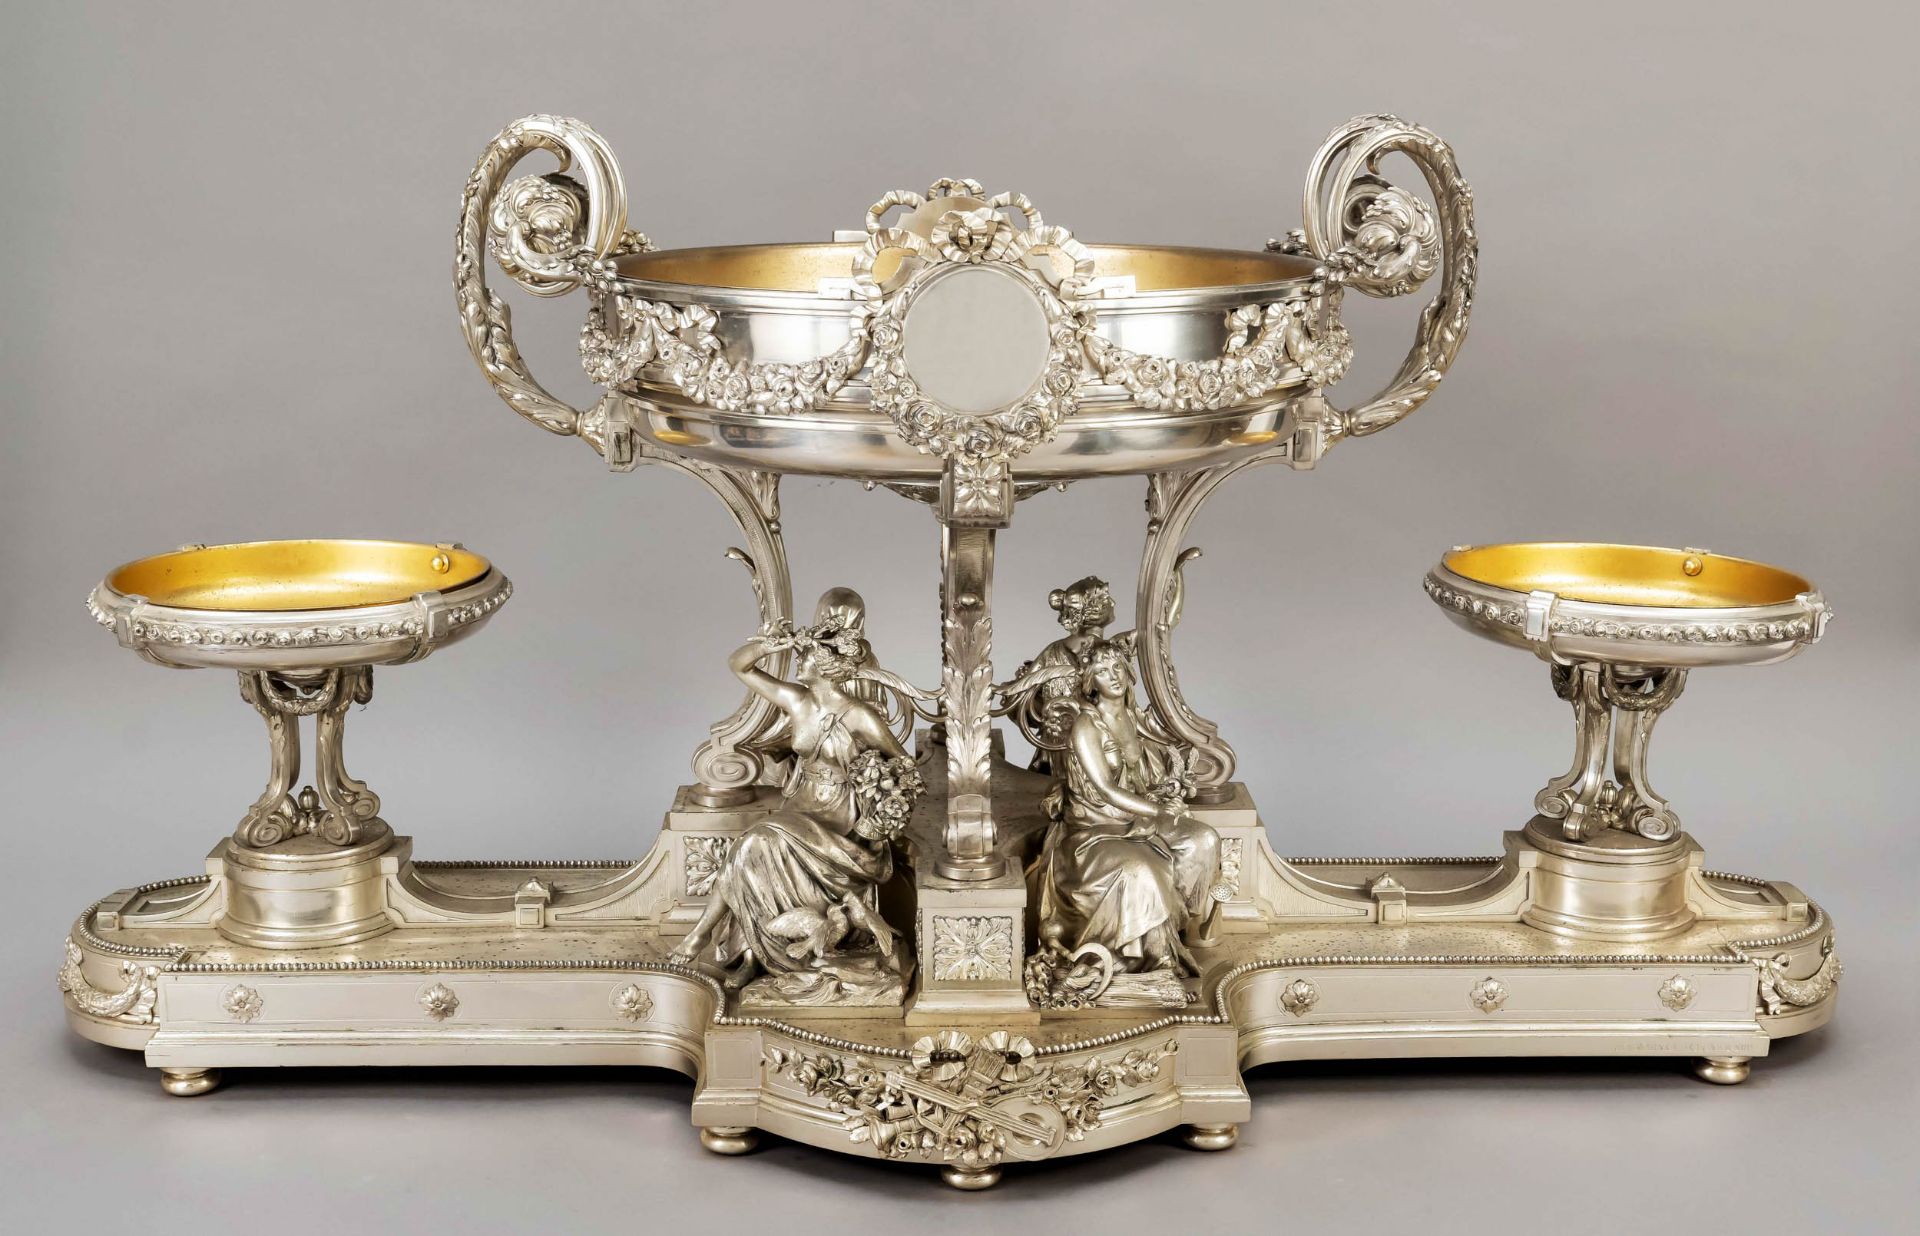 Very large centerpiece, German, circa 1900, maker's mark Sy & Wagner, Berlin, silver 800/000, - Image 4 of 7